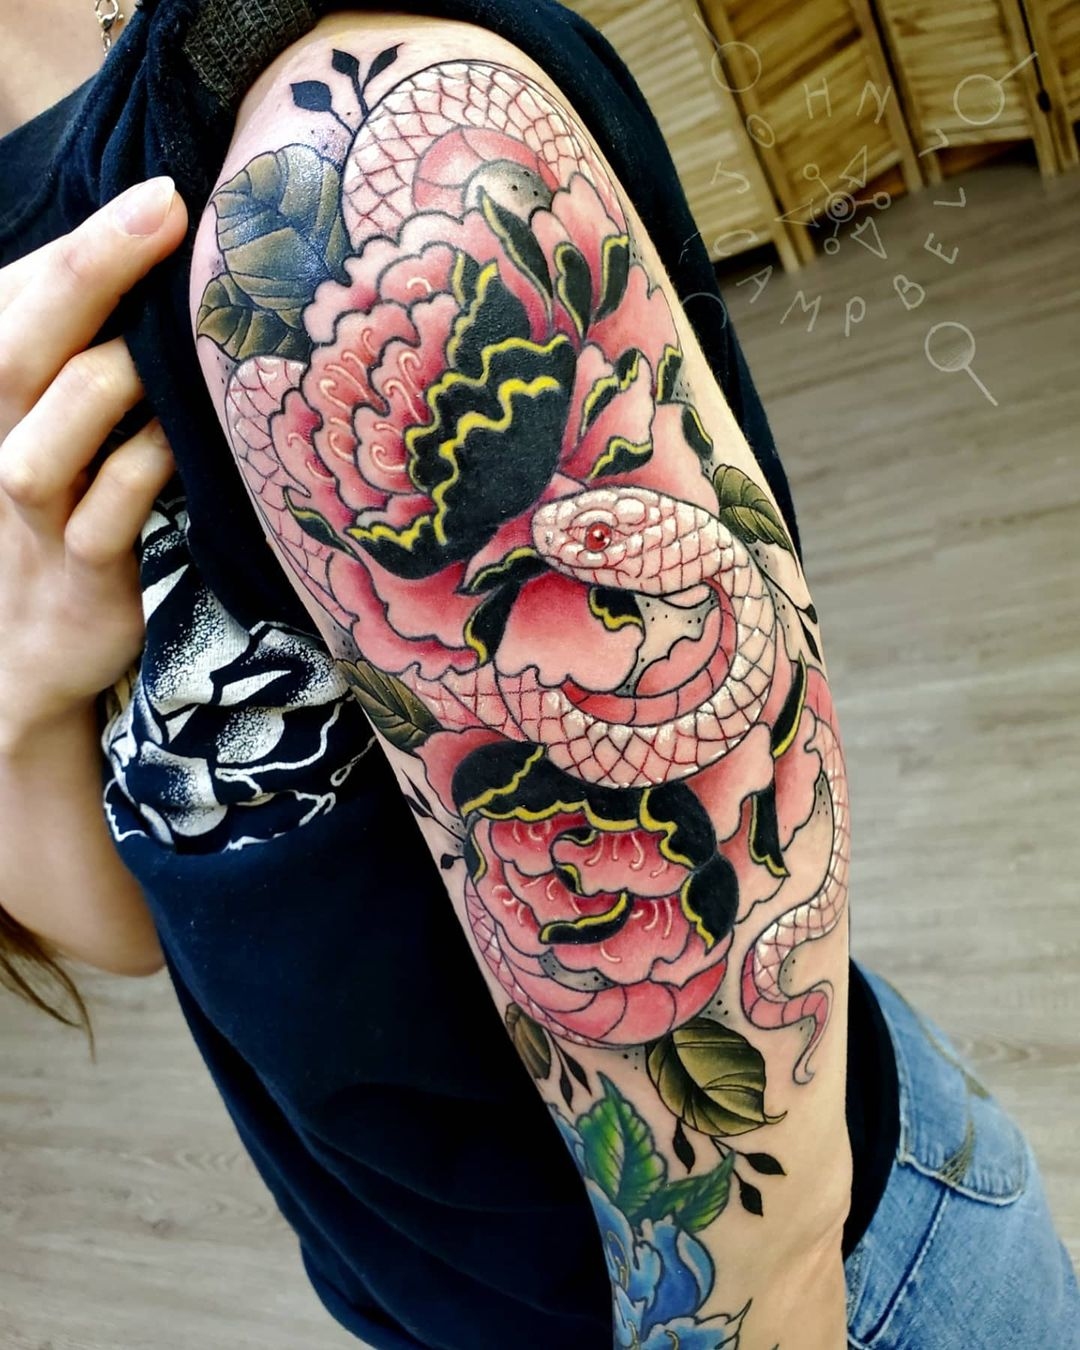 Tattoo of a snake with flowers by John Campbell at Sacred Mandala Studio tattoo parlor in Durham, NC.